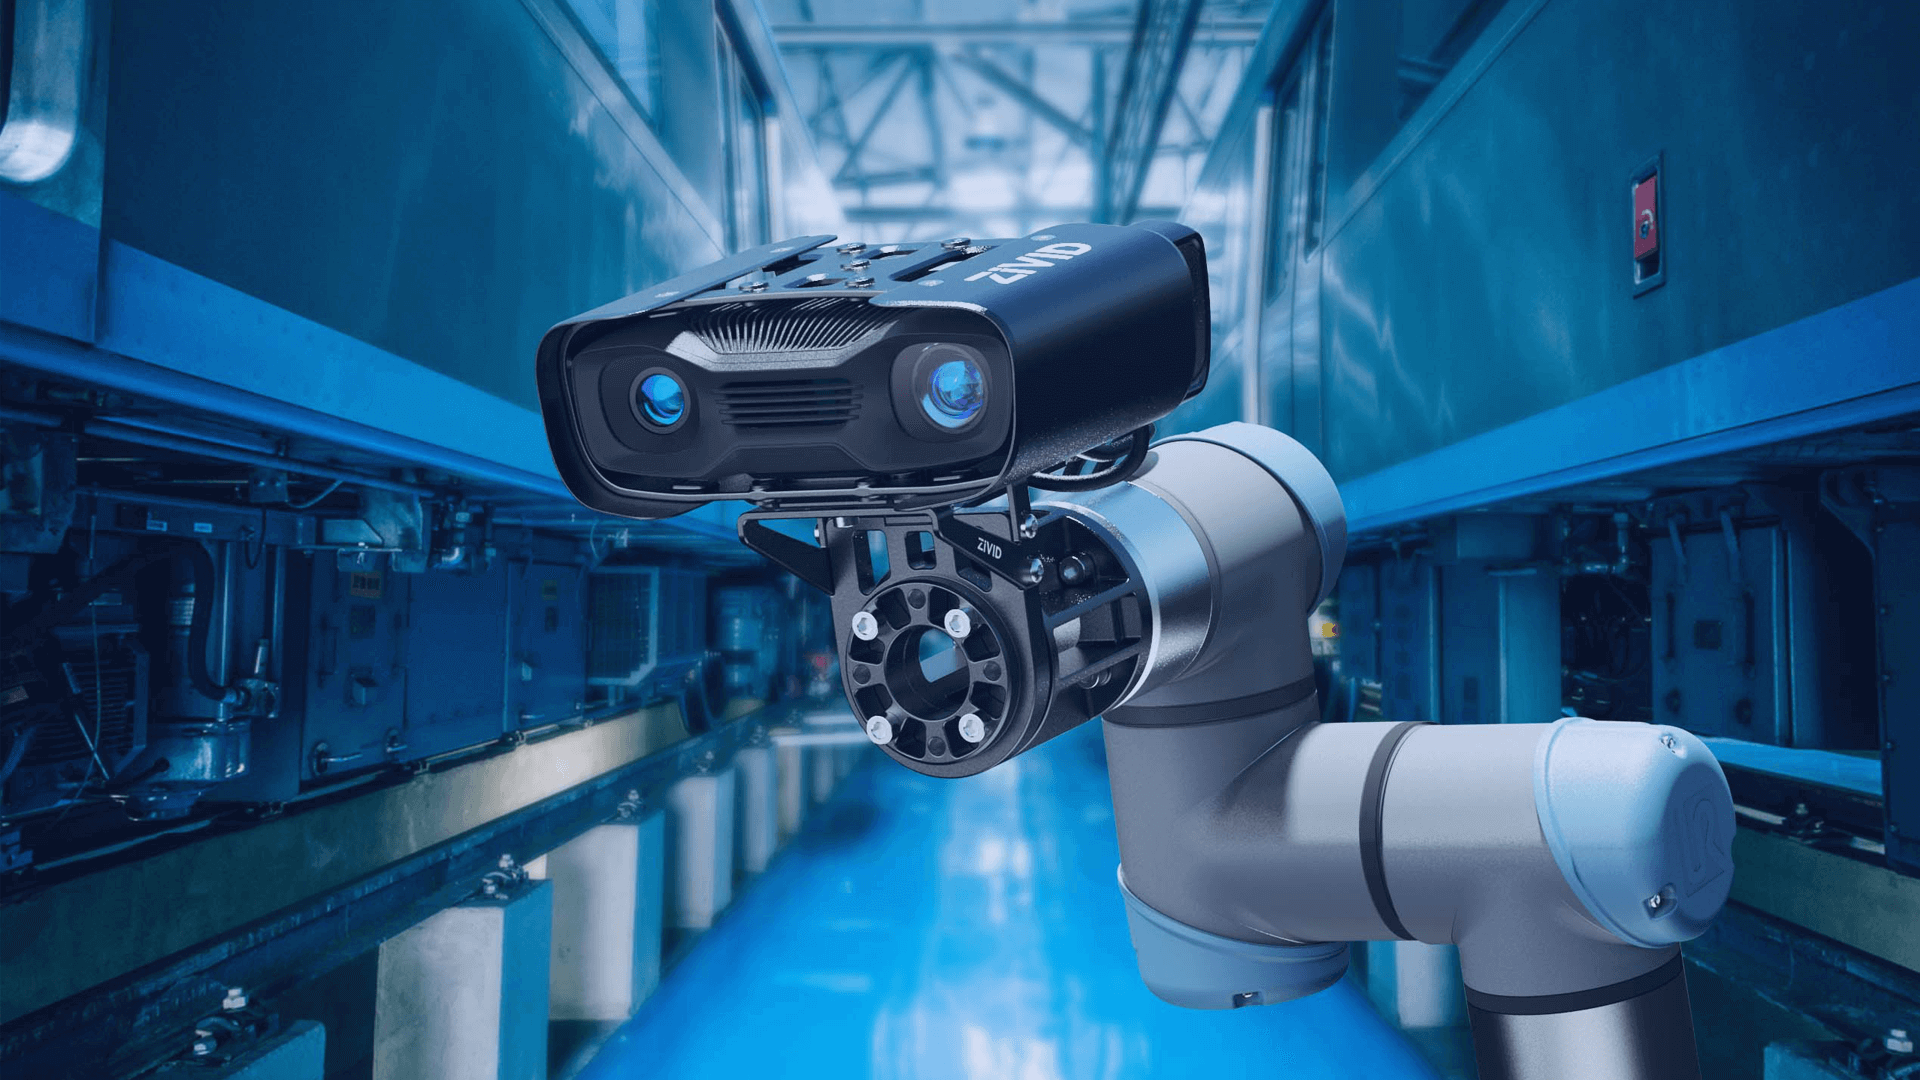 Automotive Inspection with Zivid 3D camera